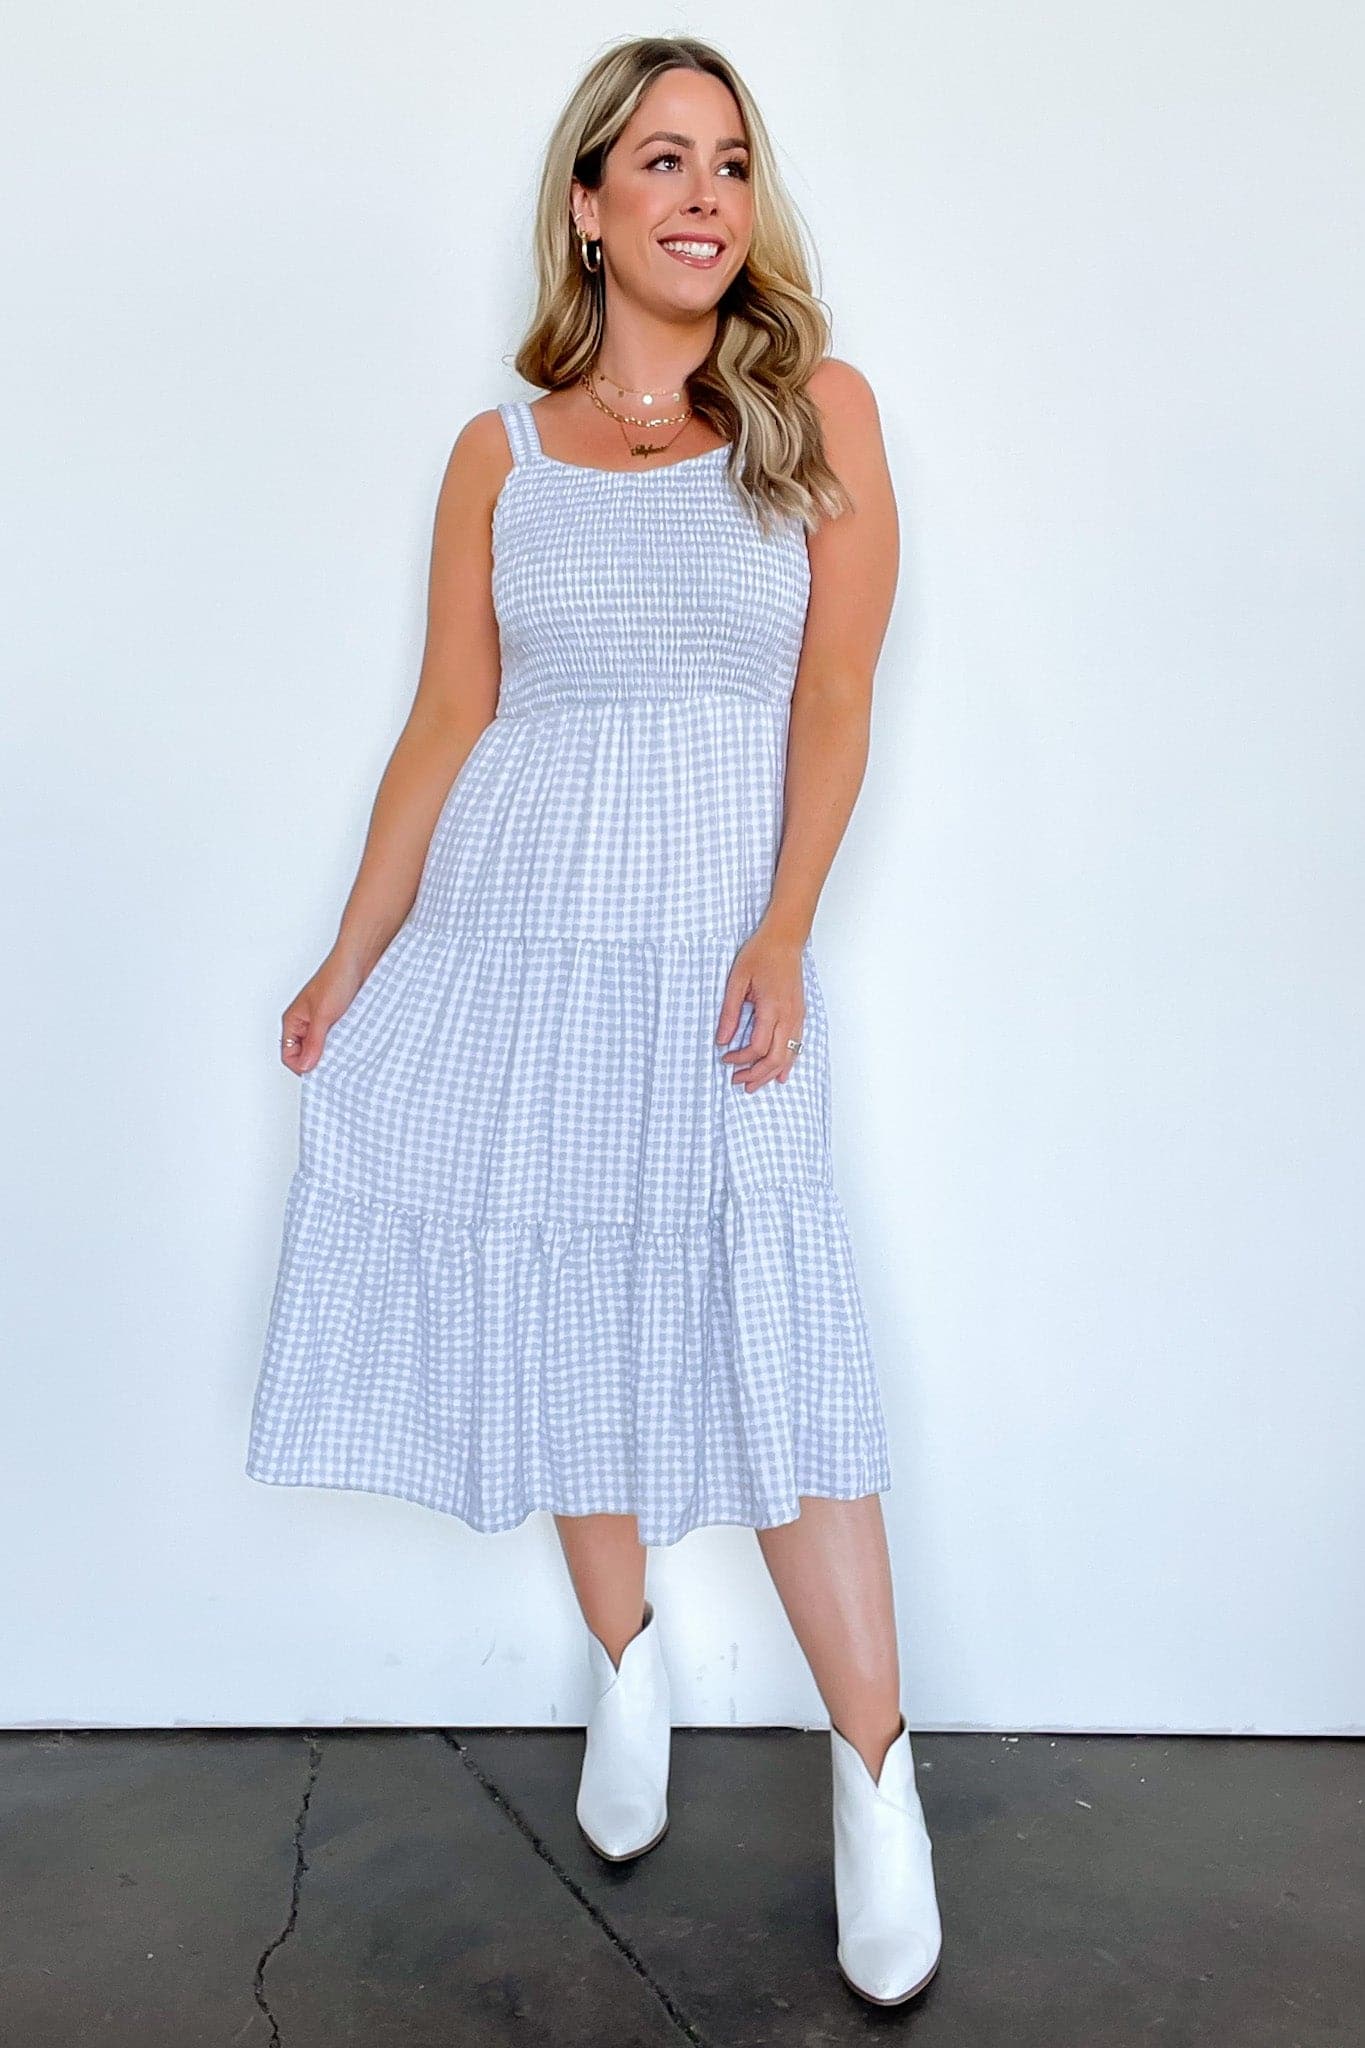  Out for the Day Gingham Smocked Tiered Dress - FINAL SALE - Madison and Mallory